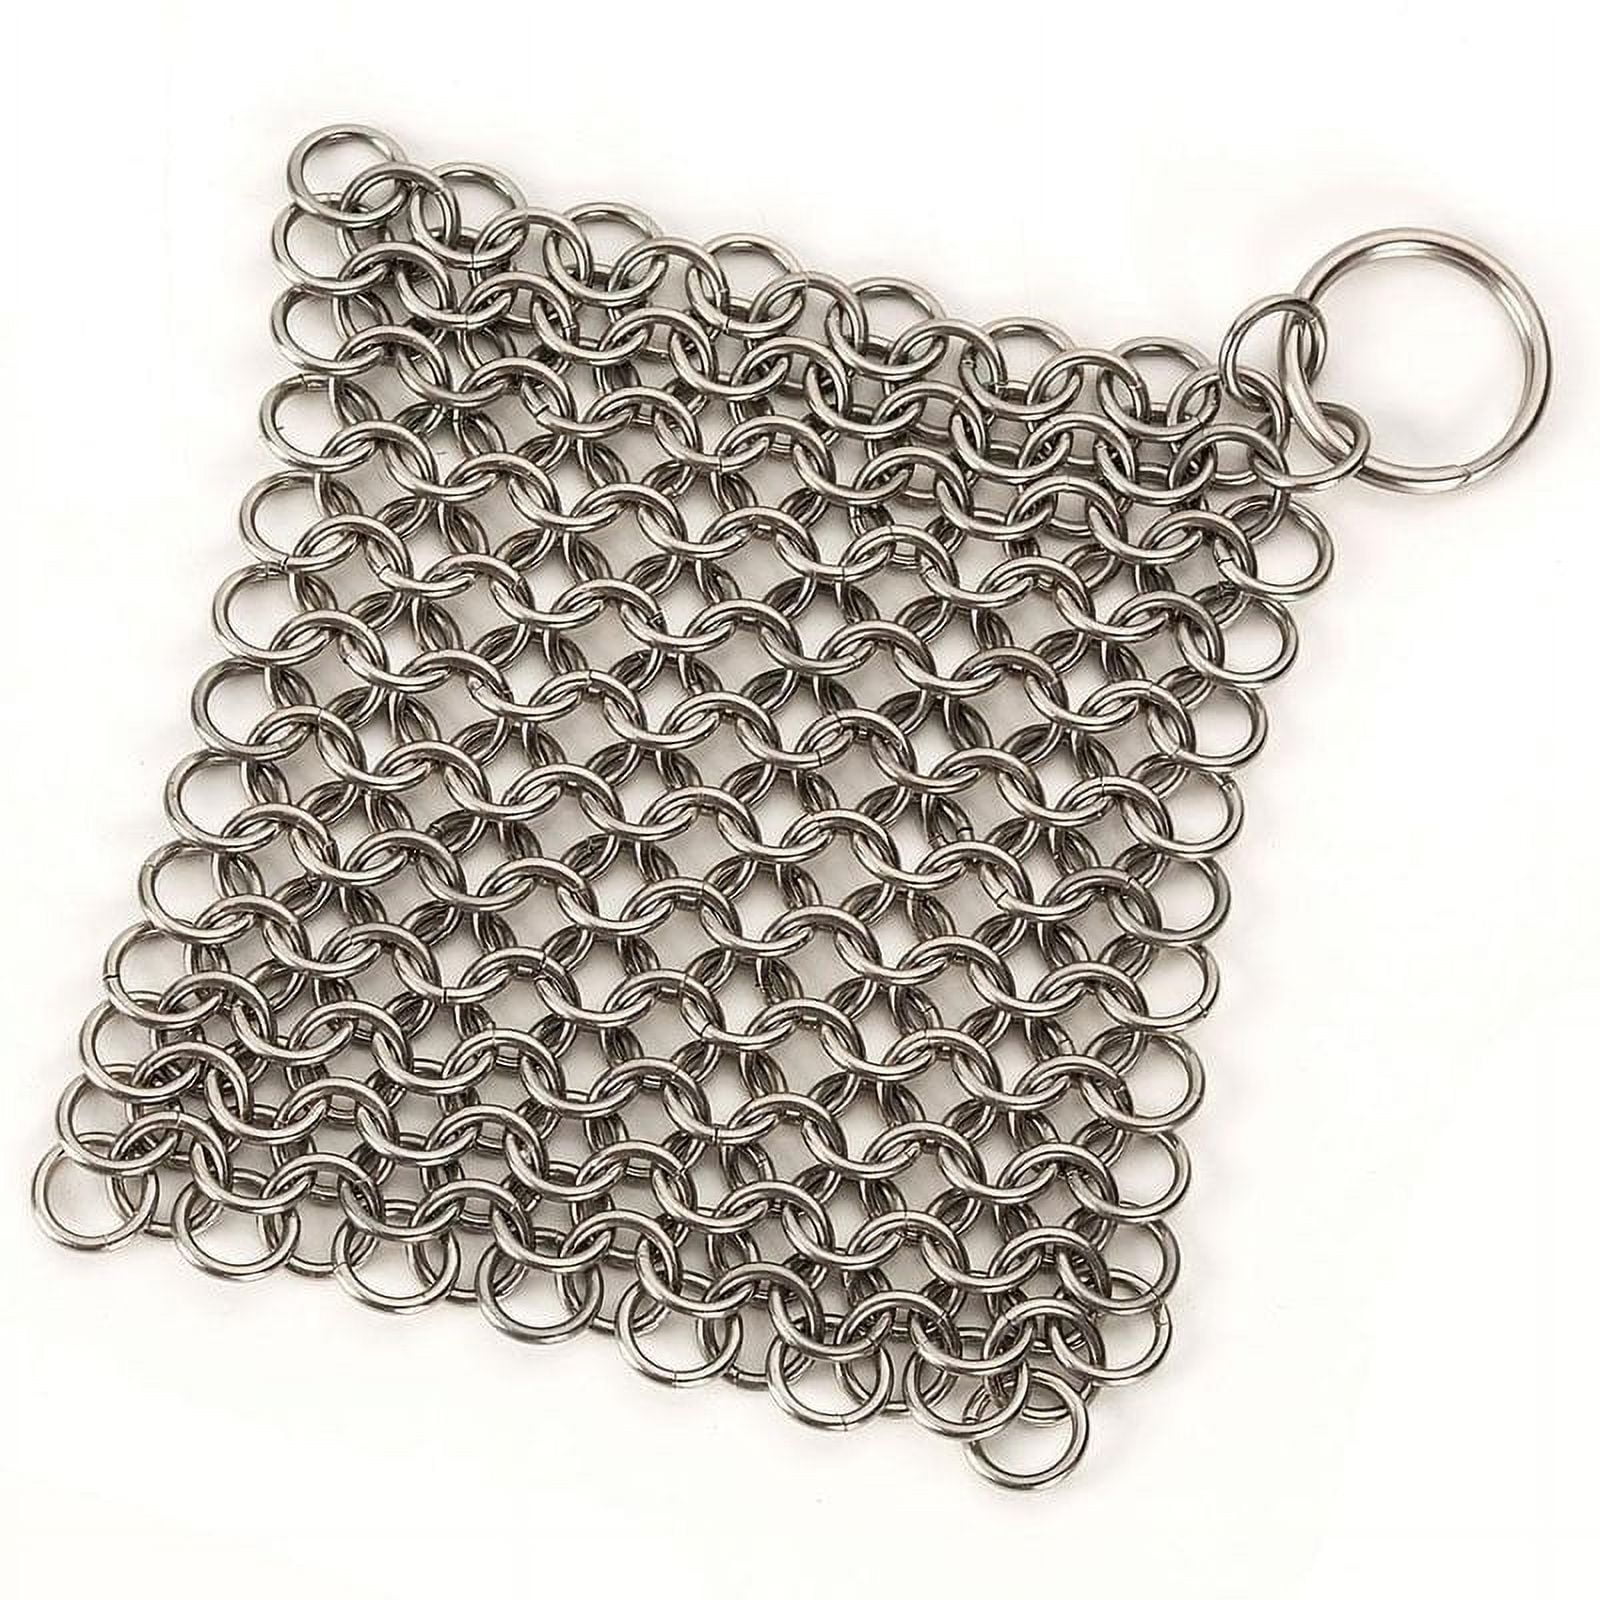 Stainless Steel Chainmail Scrubber - Austin Foundry Cookware